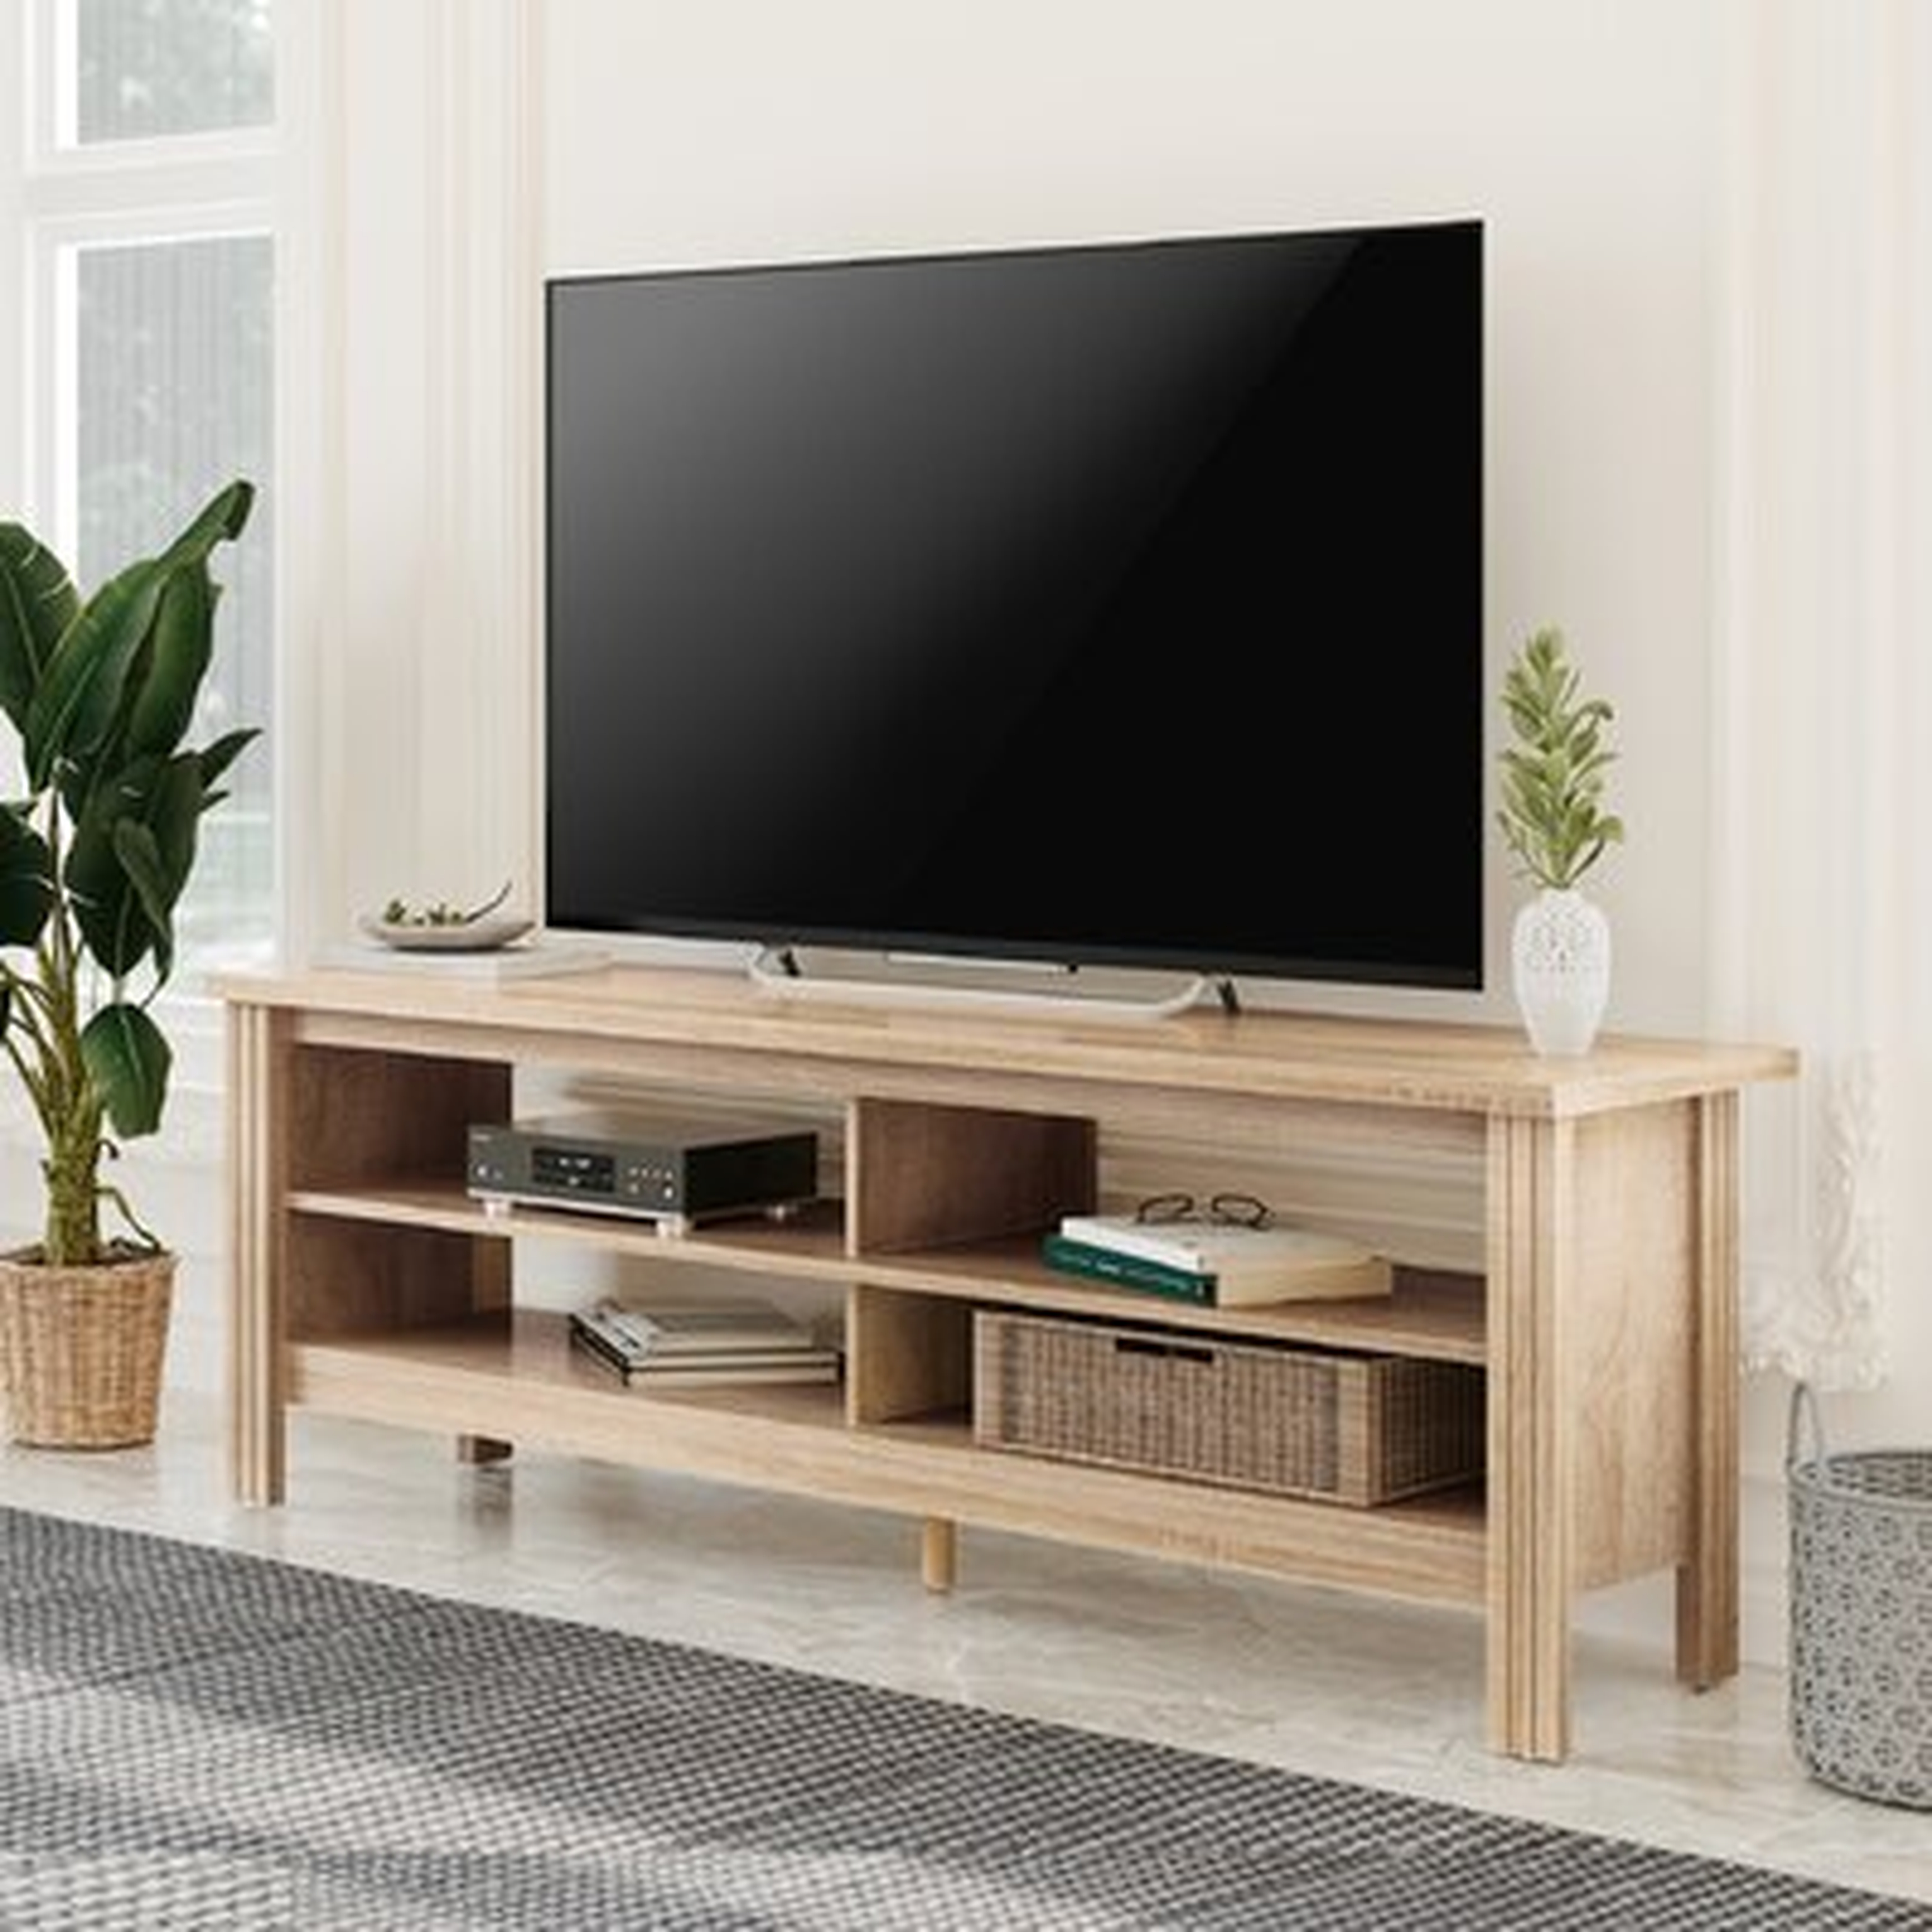 TV Stand For Tvs Up To 65" - Wayfair